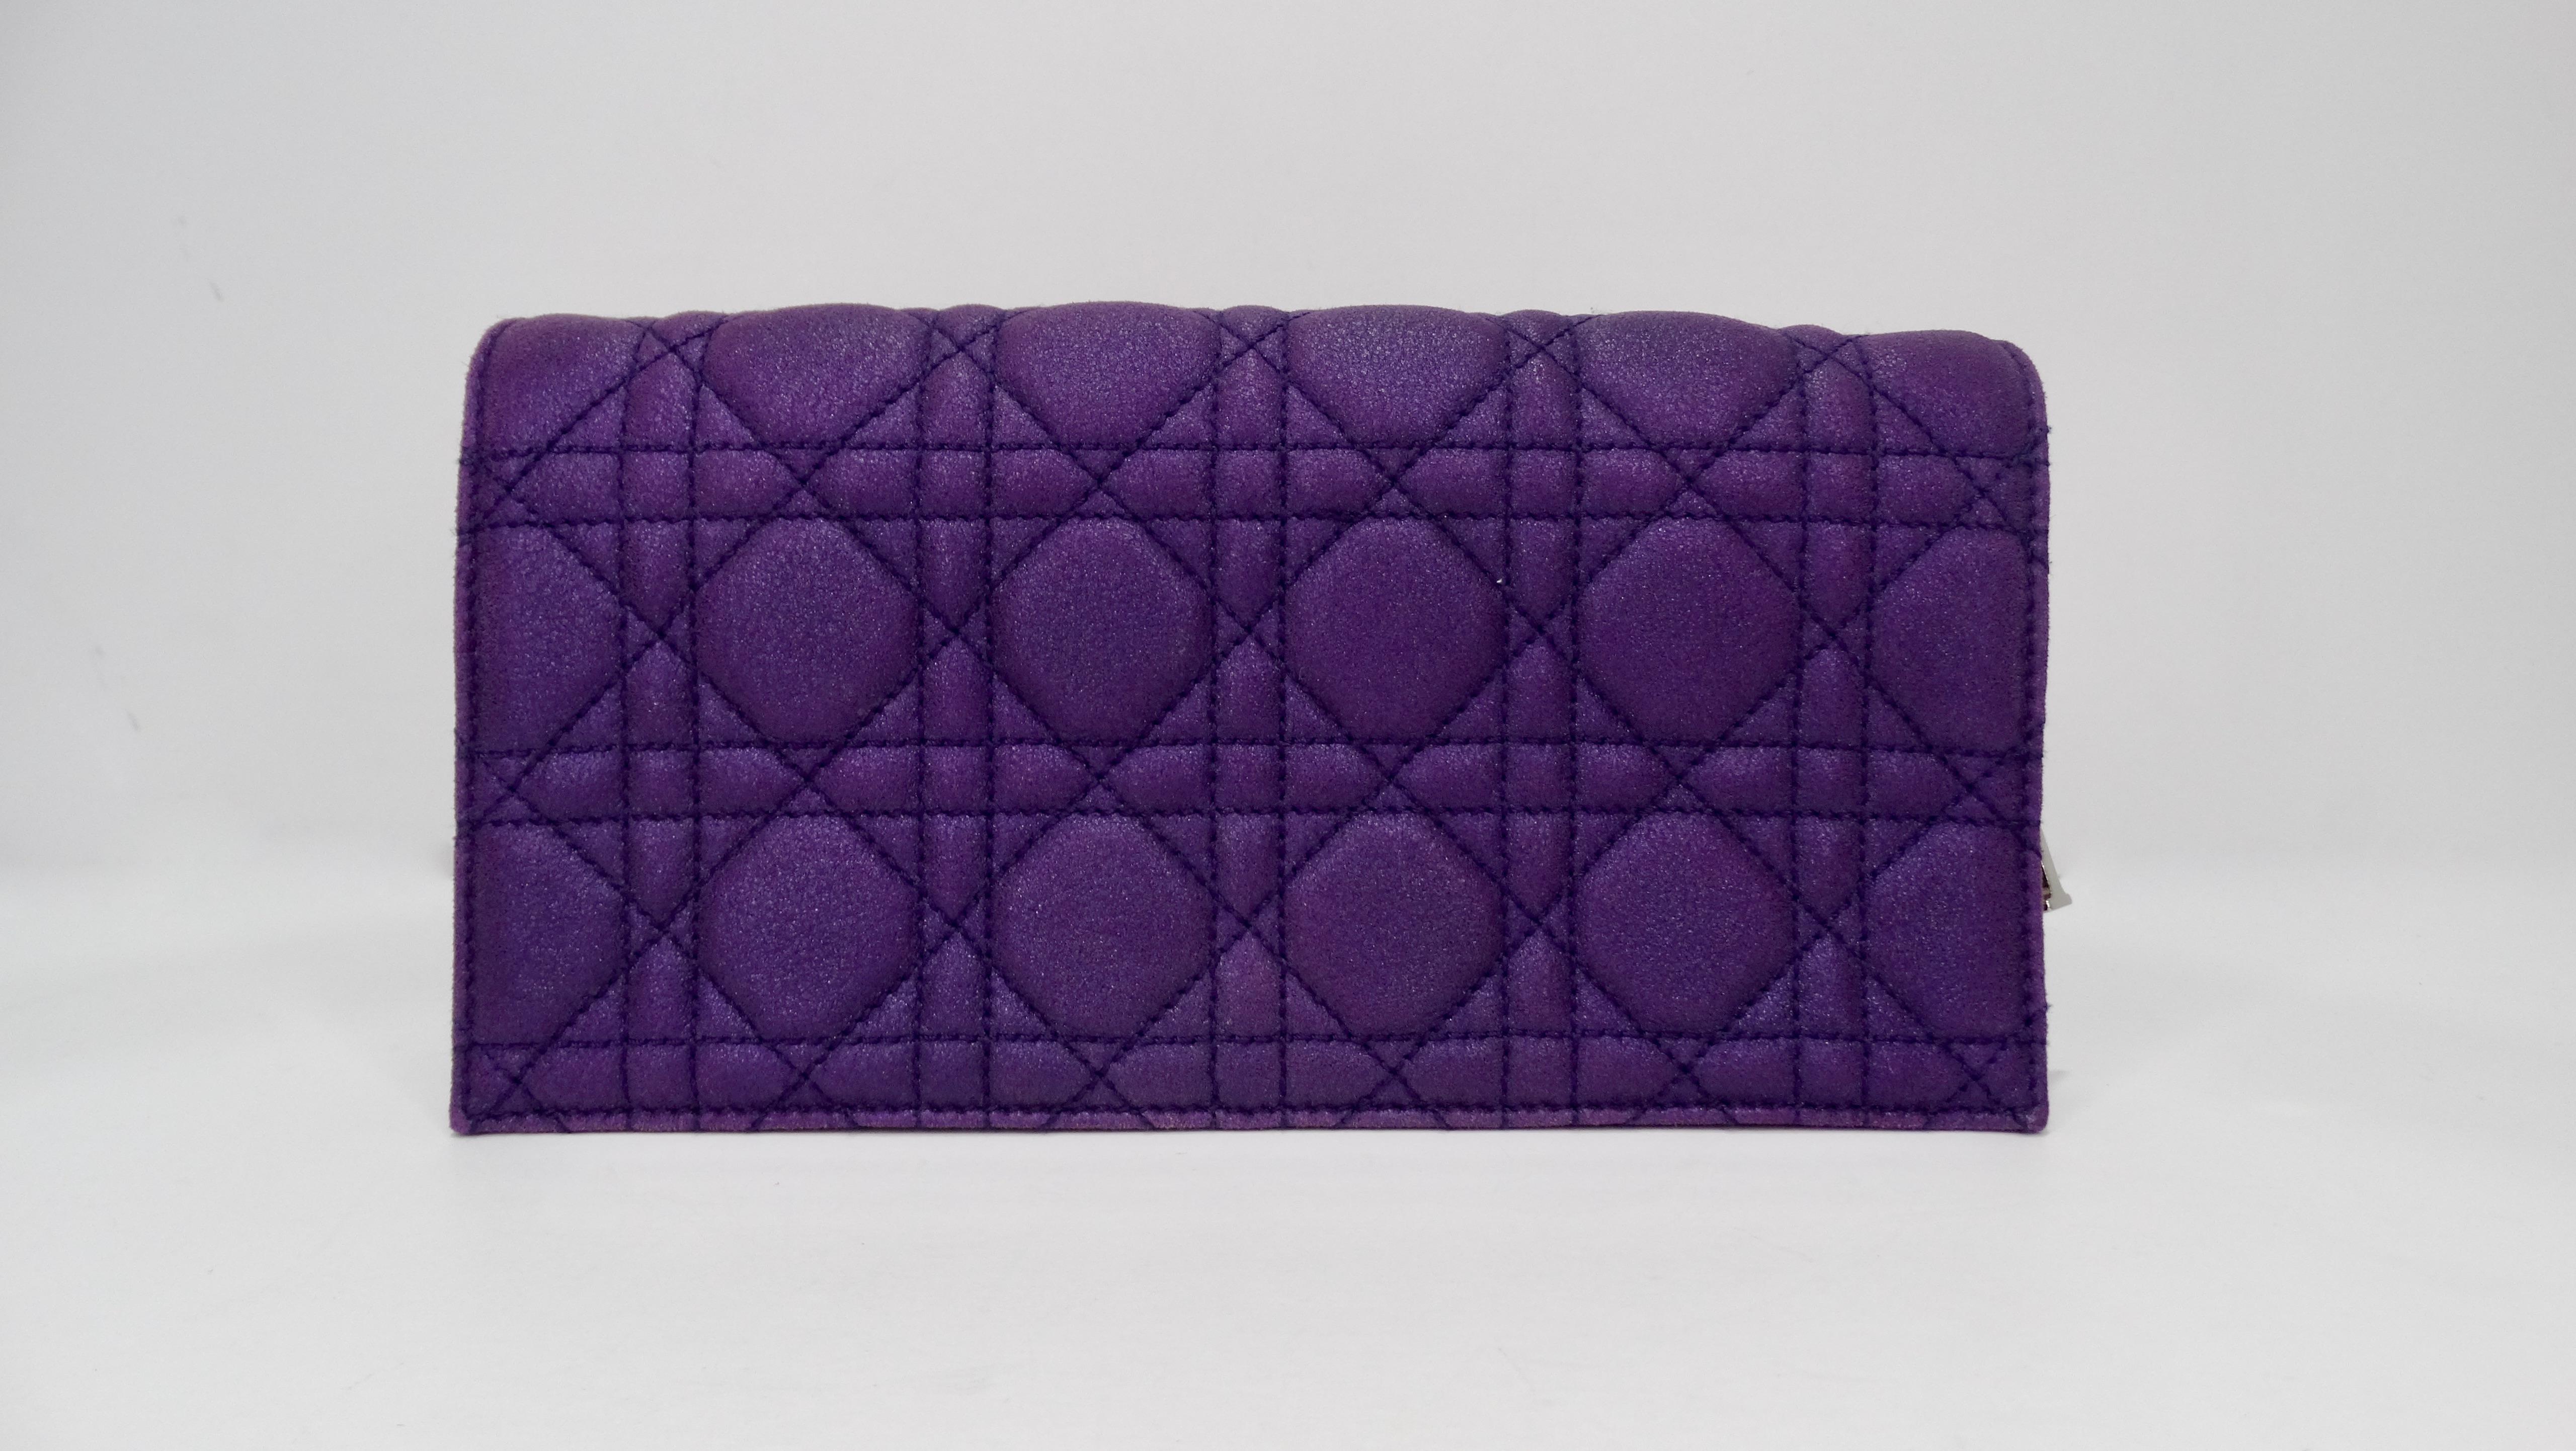 How sweet is this Dior clutch?! This adorable Dior clutch features a beautiful purple quilted material with a double silver chain strap, and a silver Dior Charm. The inside features a stunning purple satin. The perfect addition for a night out! Pair